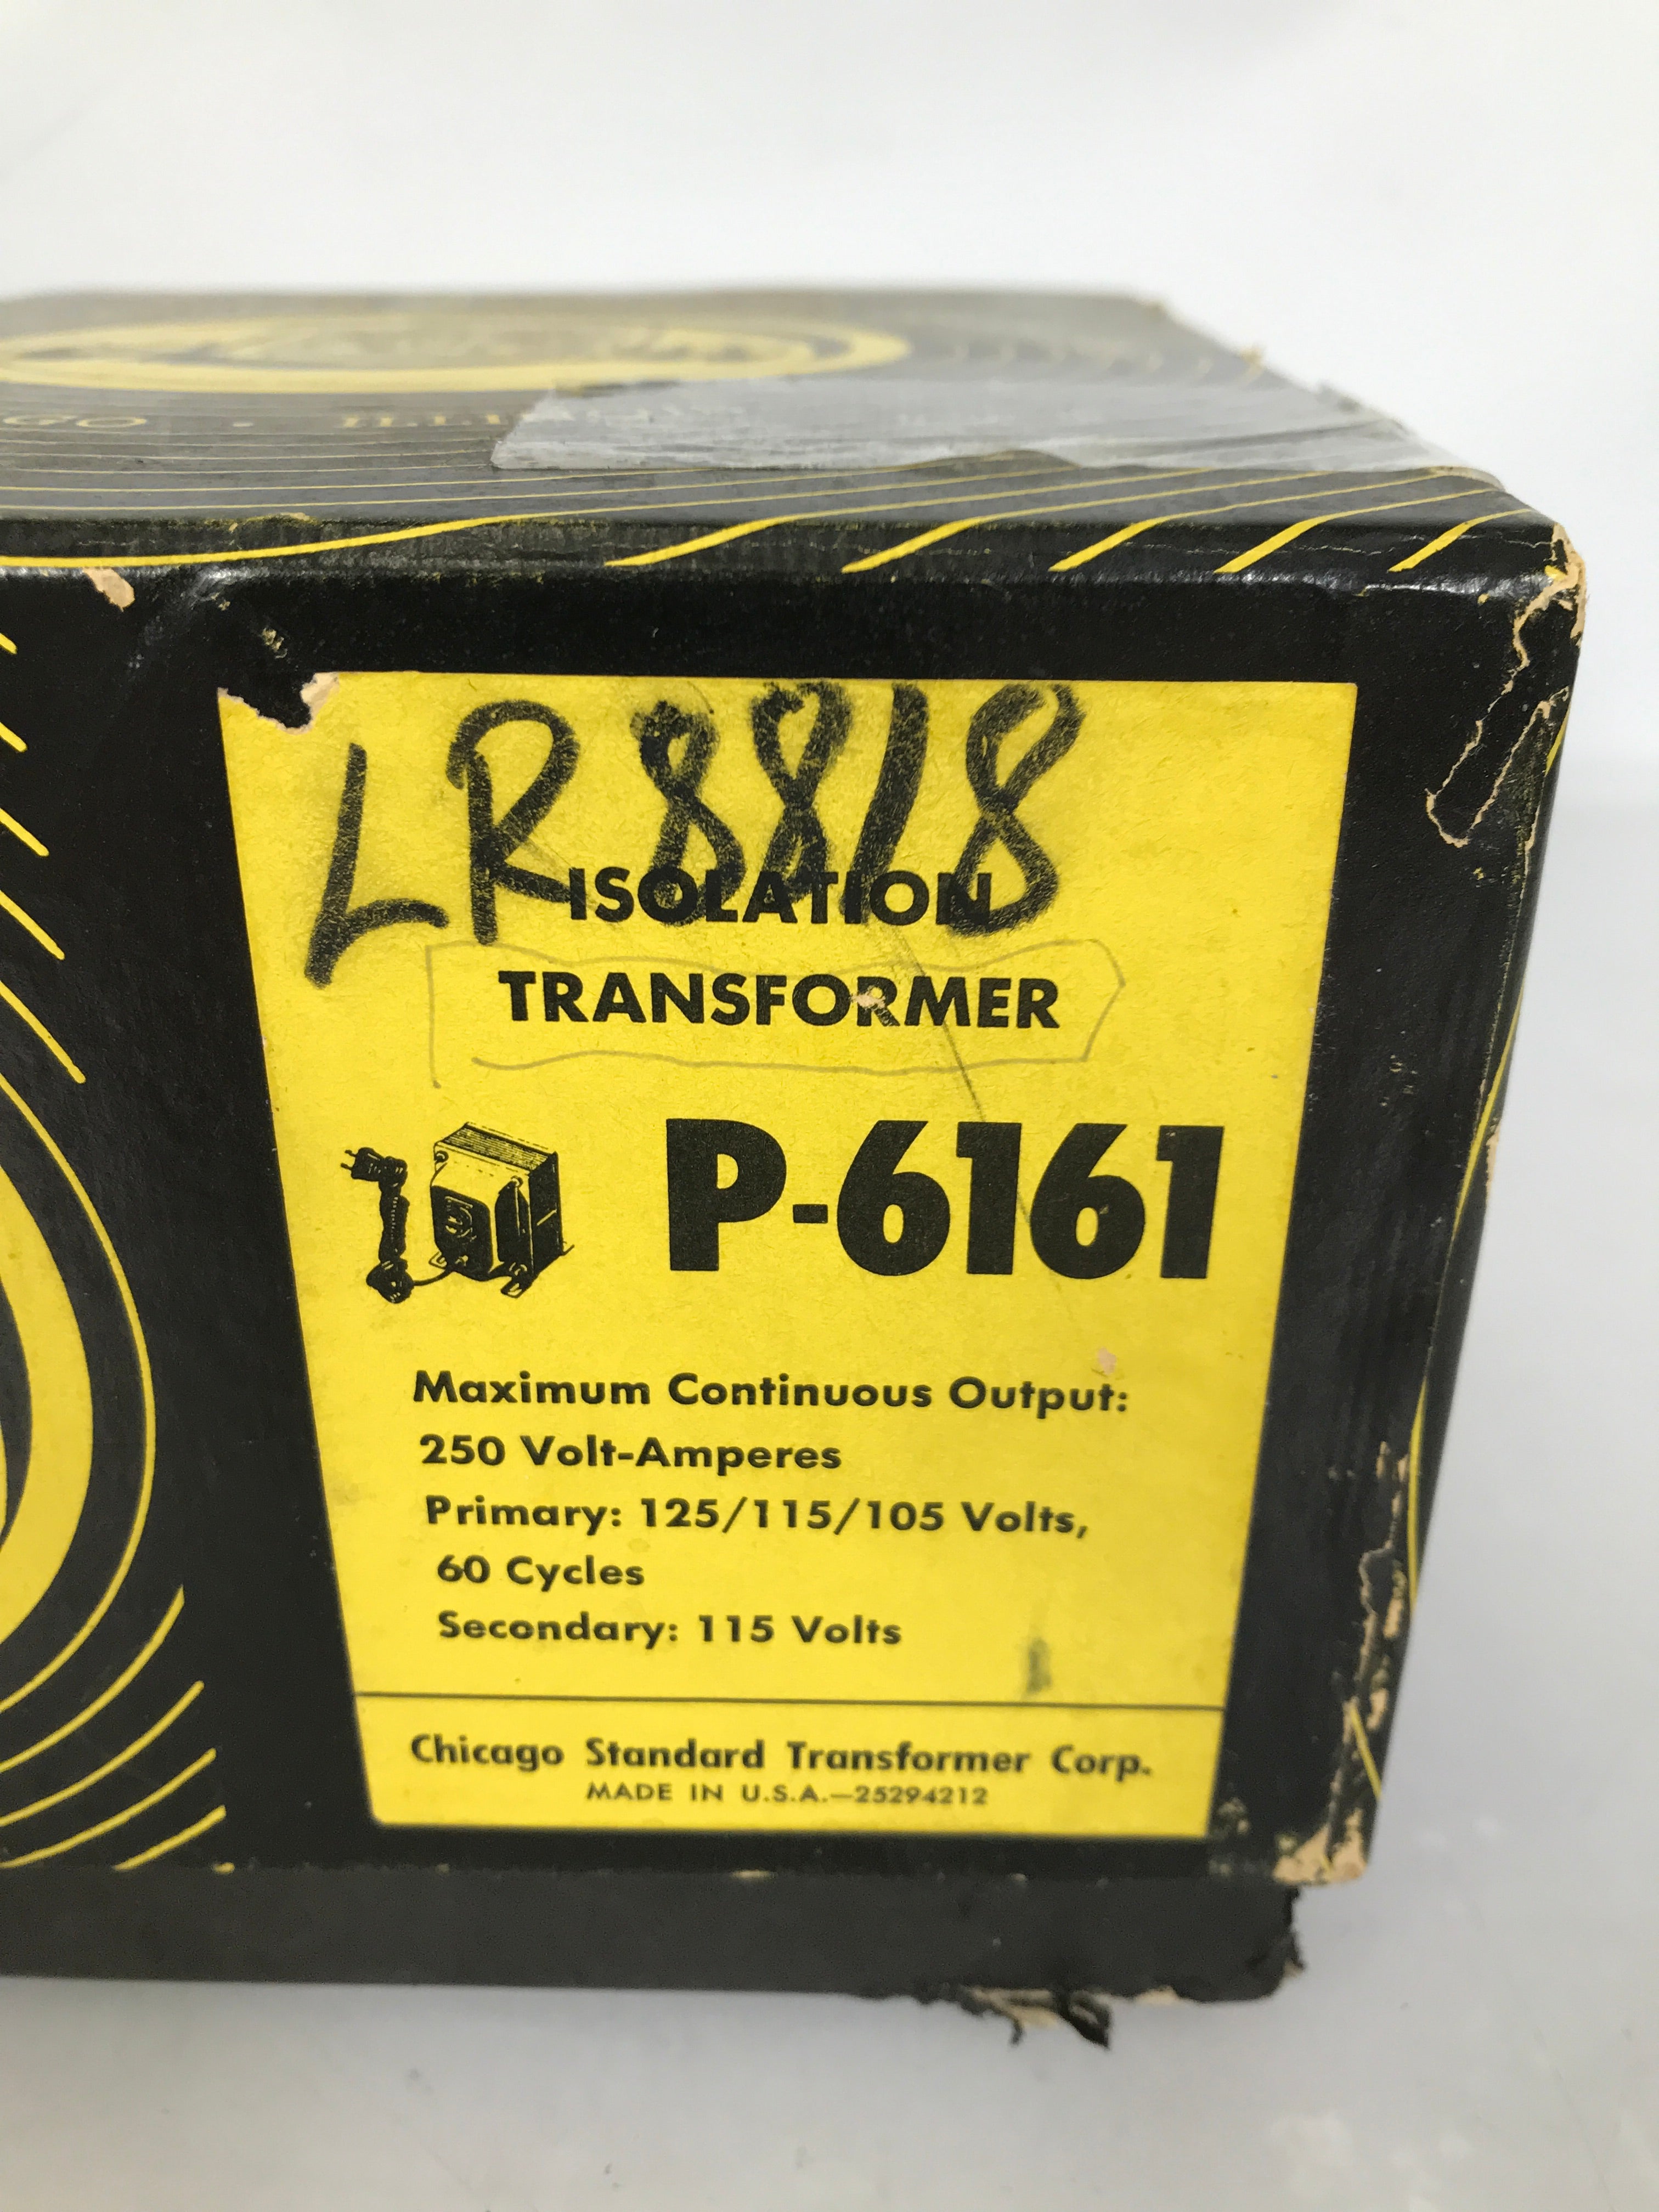 Vintage Stancor P-6161 Isolation Transformer with Box